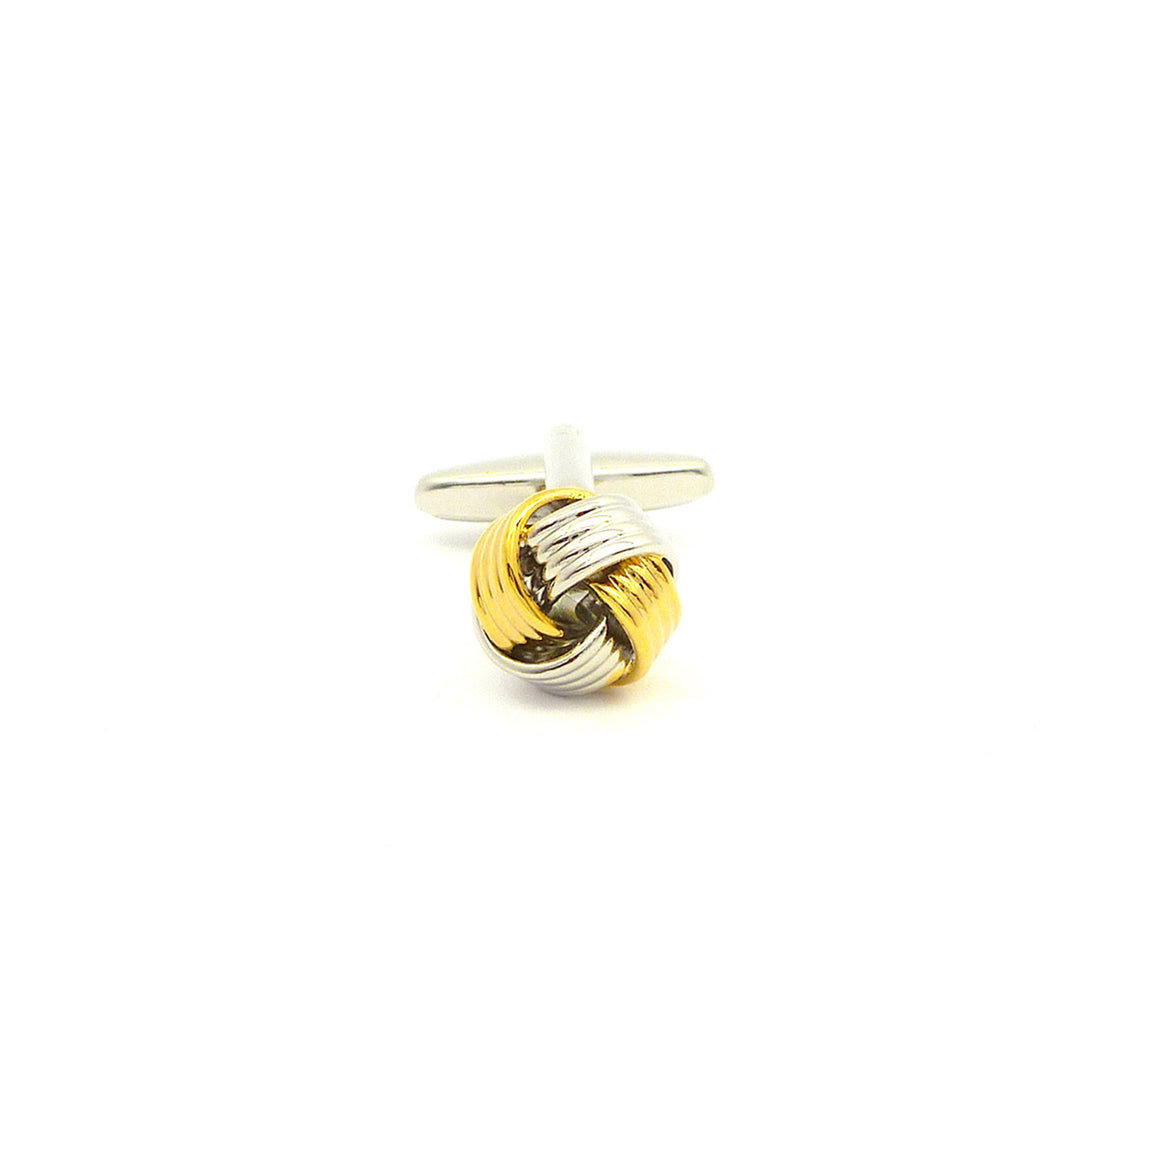 Wild Links - Gold and Silver Knot Cufflinks